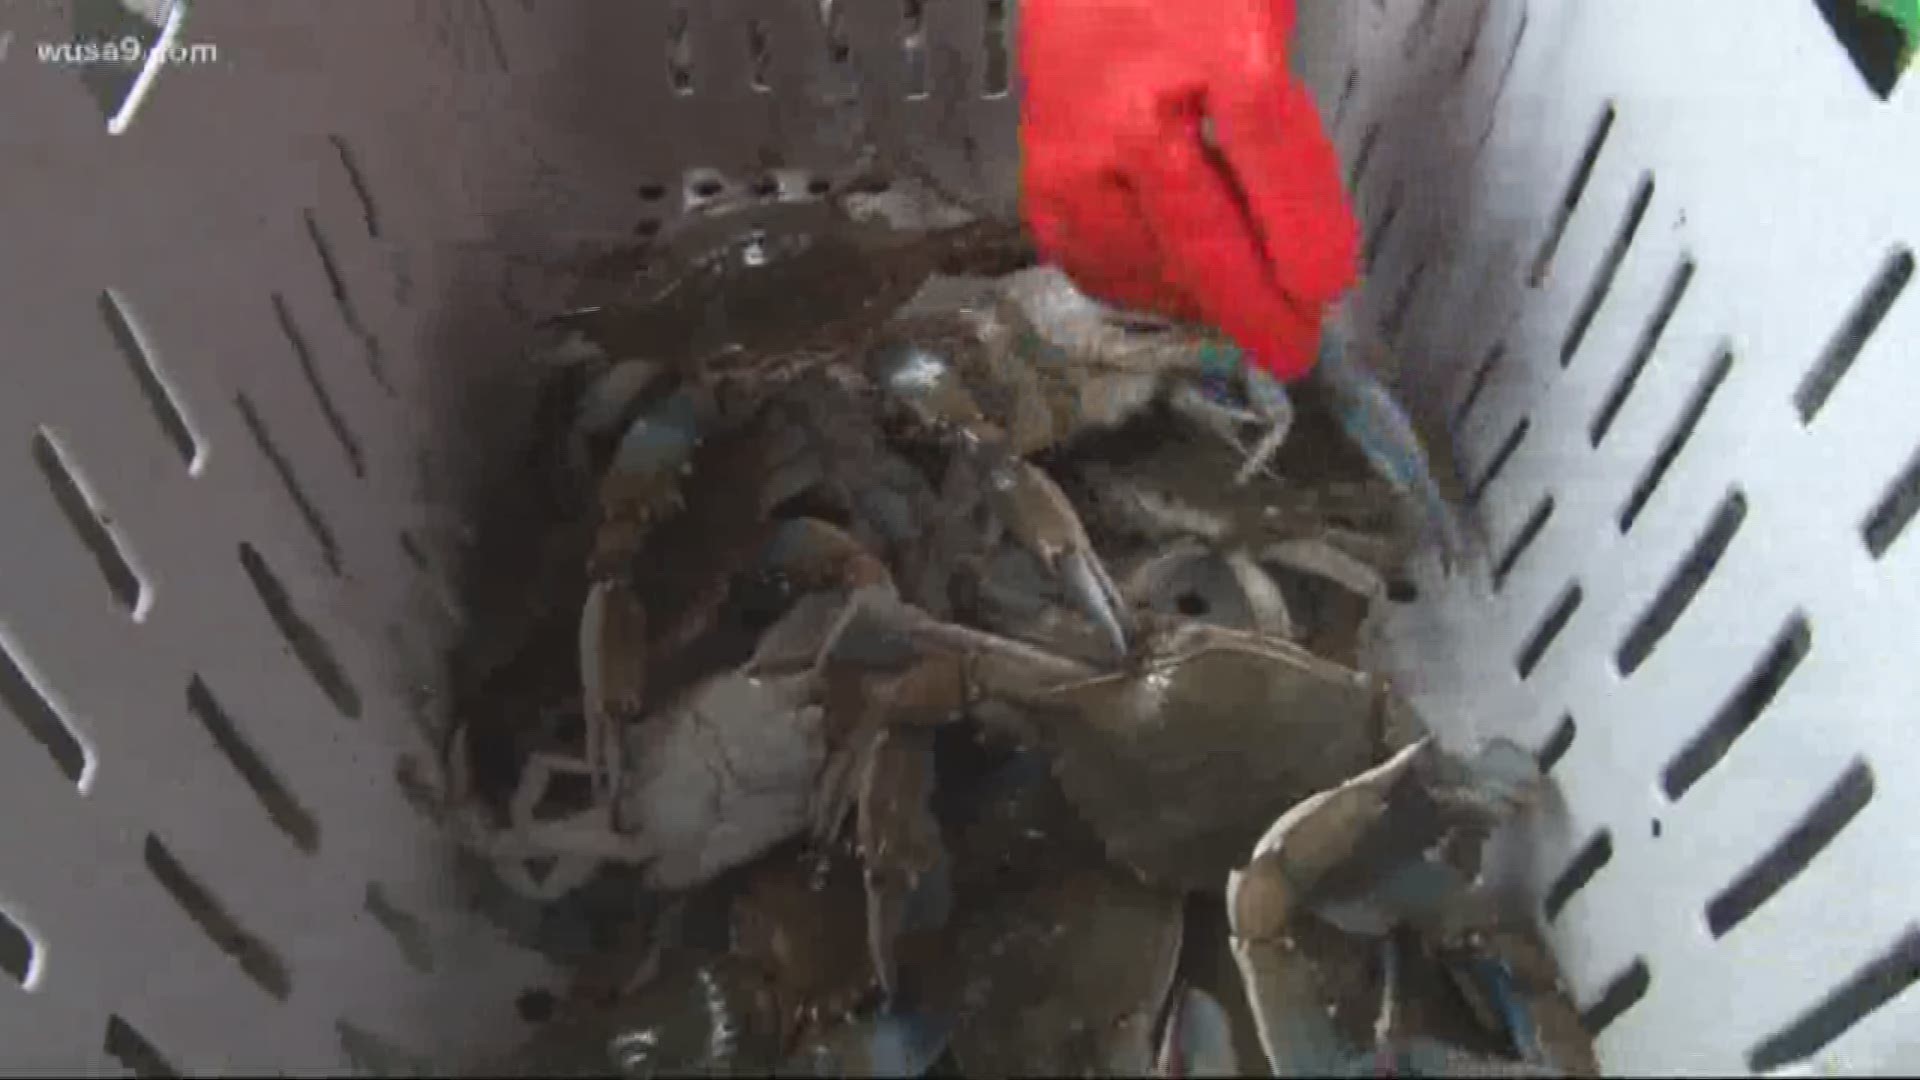 Report: Chesapeake Bay blue crab population remains healthy